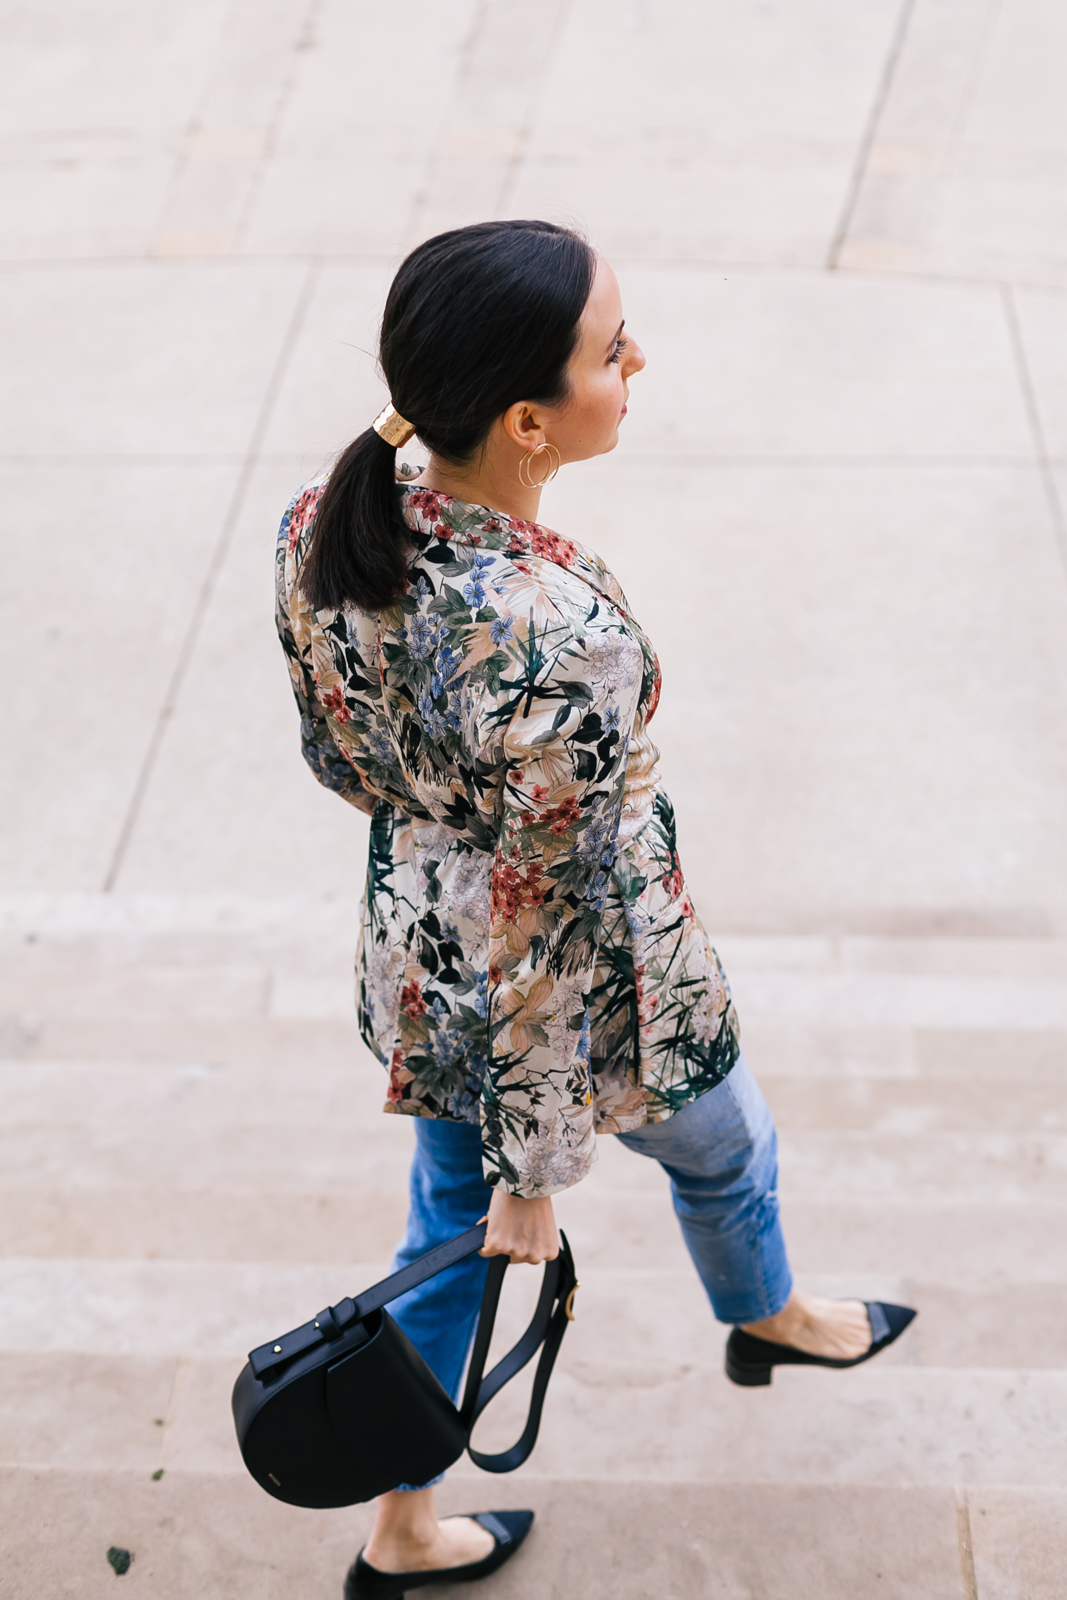 Yana Frigelis of NoMad Luxuries wearing a floral blazer from Zara with boyfriends jeans and black accessories for Spring 